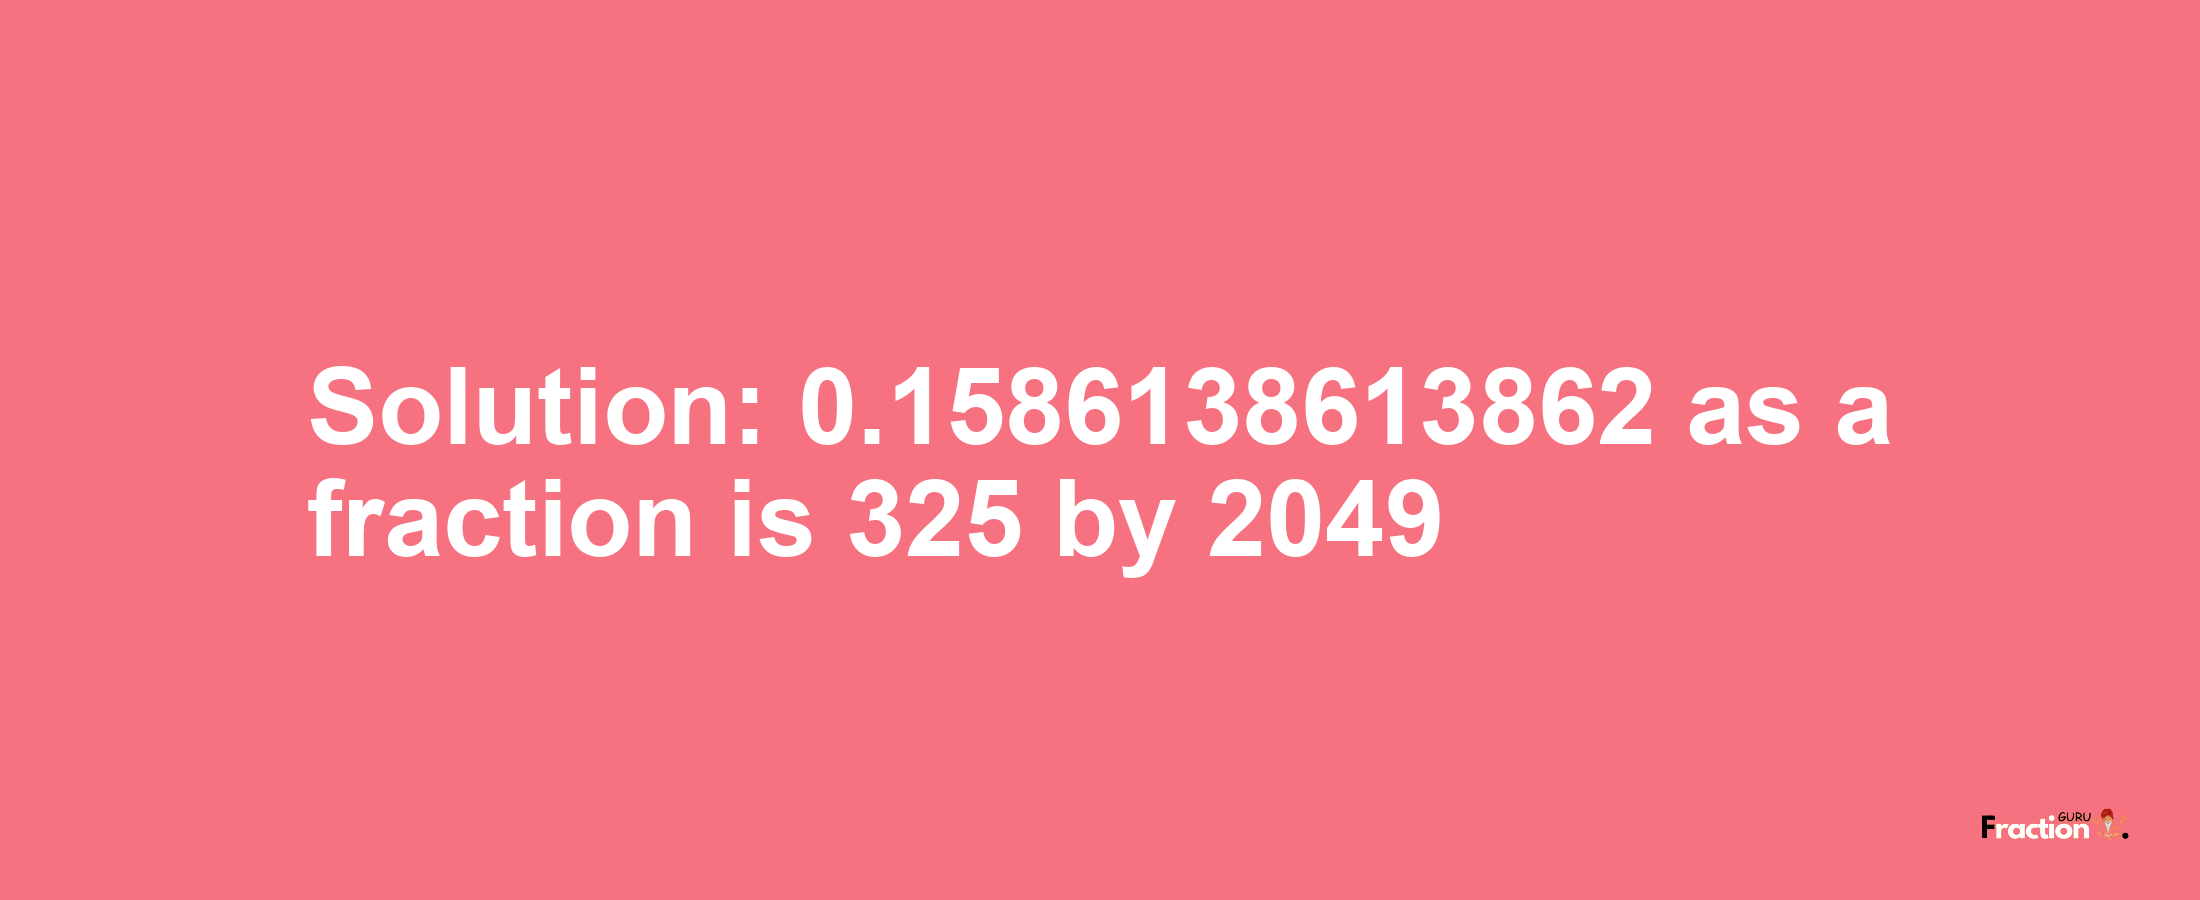 Solution:0.1586138613862 as a fraction is 325/2049